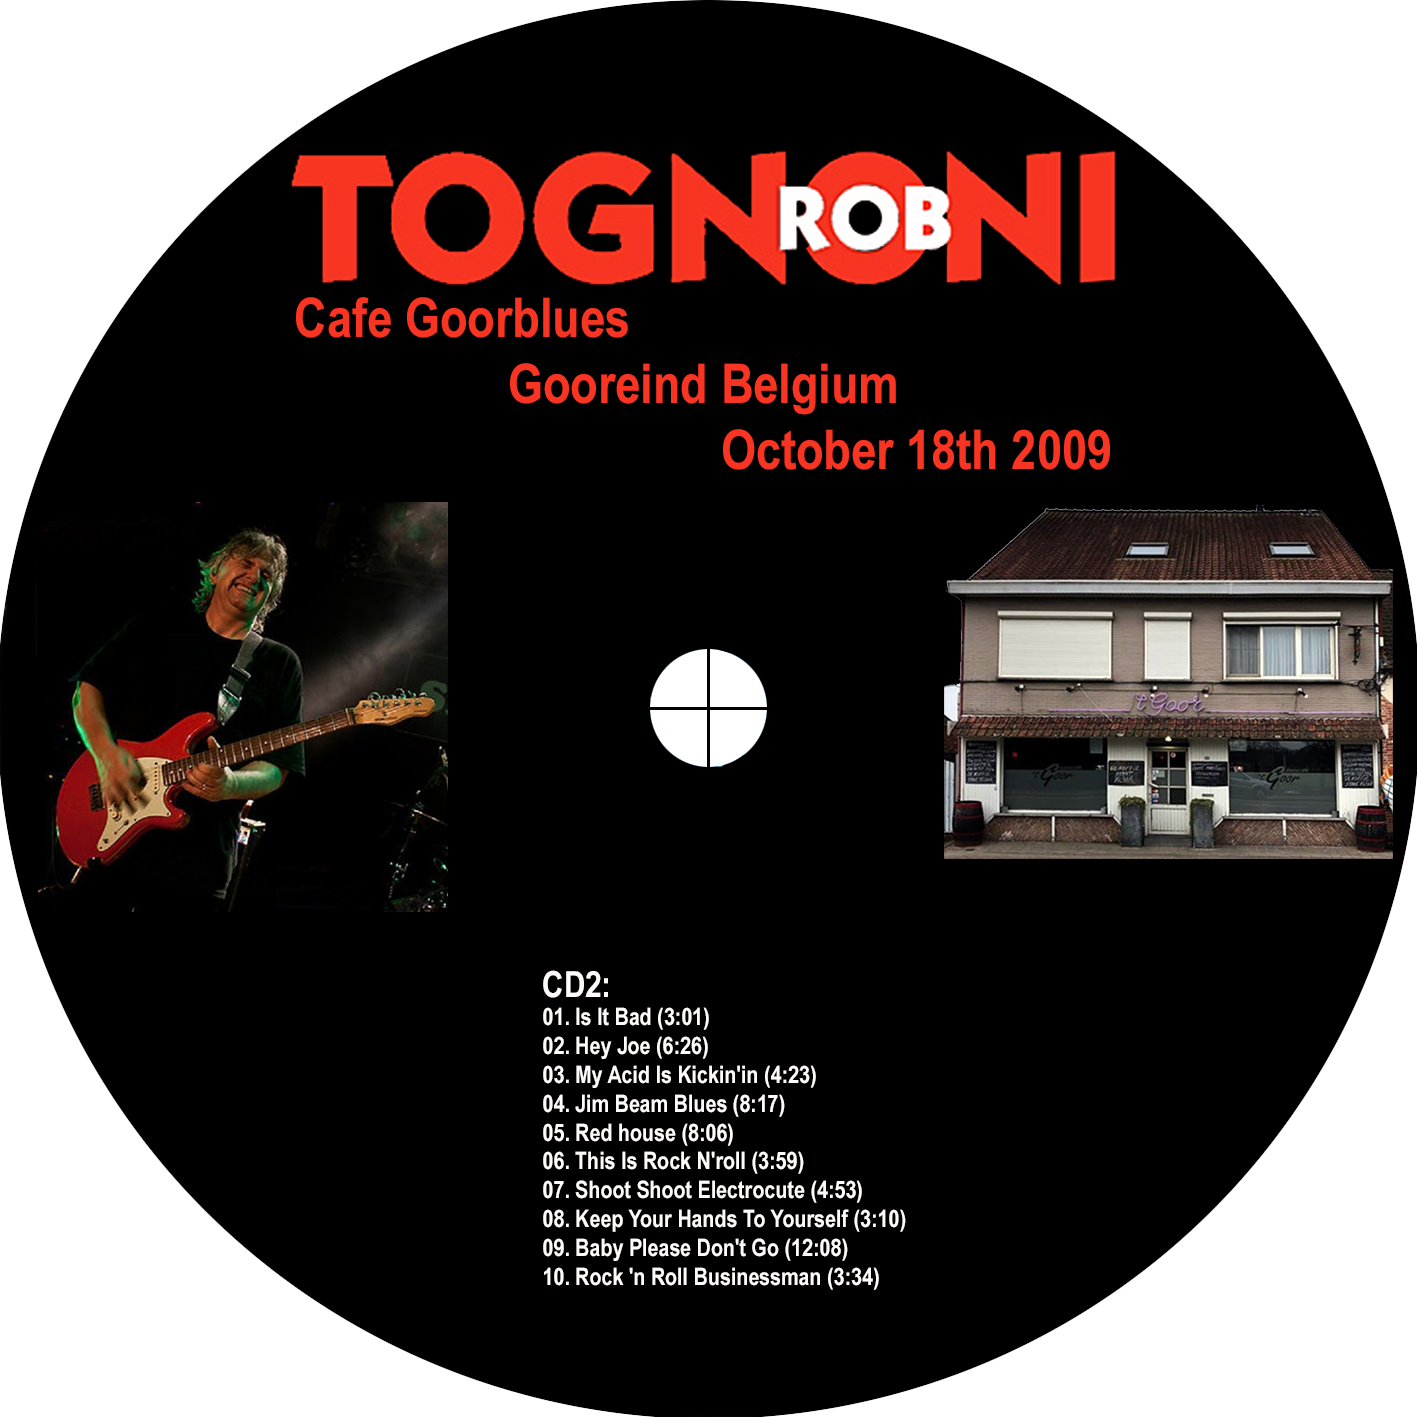 rob tognoni 2009 10 18 cd live at cafe goorblues label 2